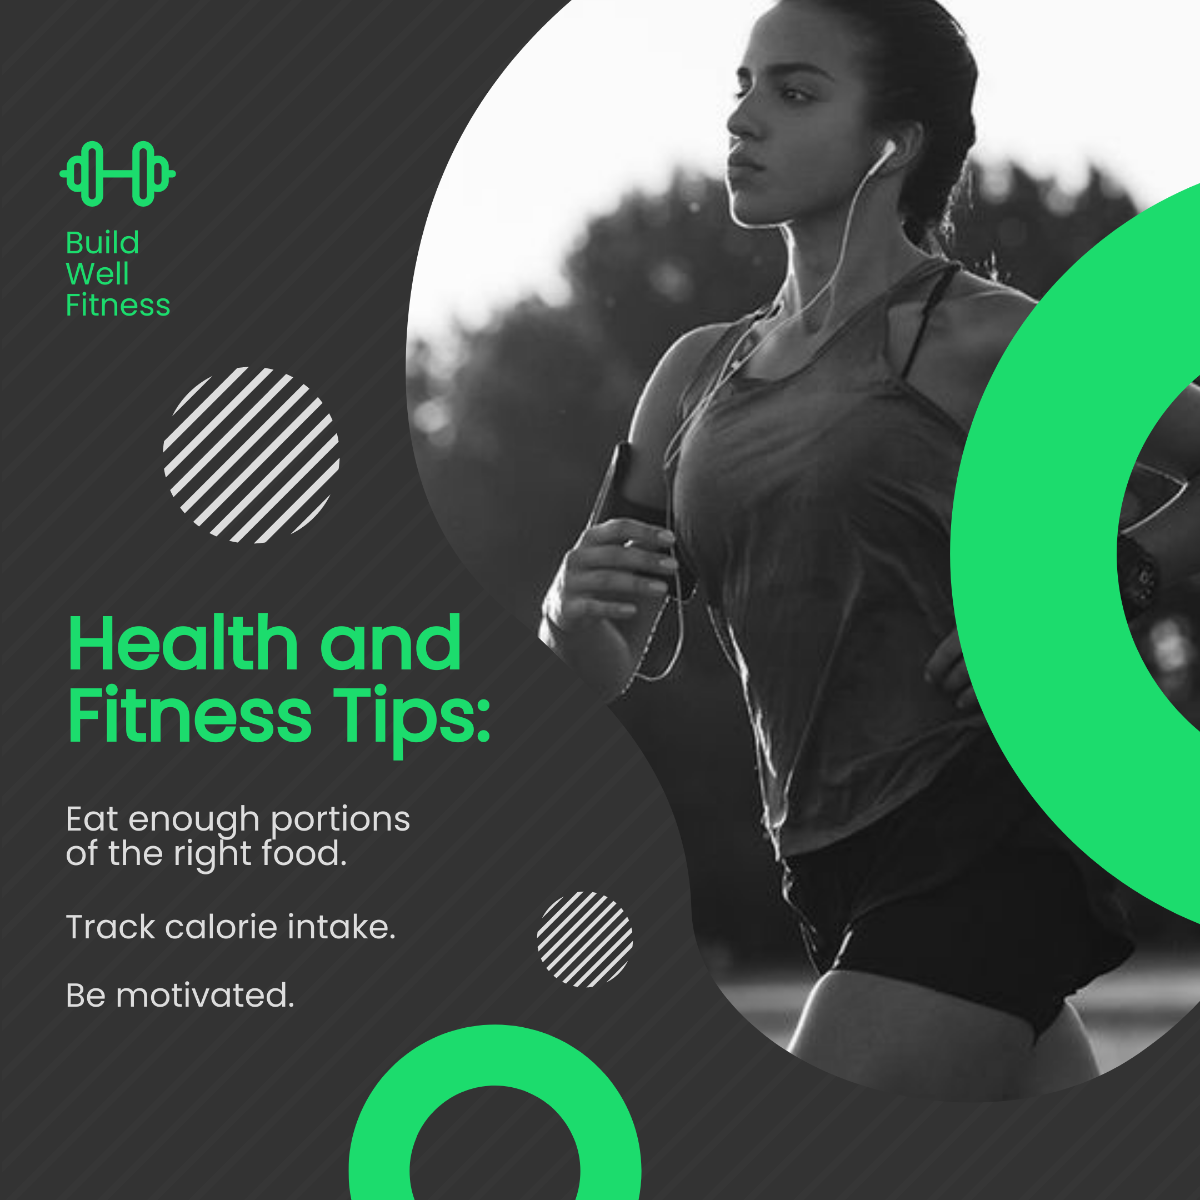 Free Health And Fitness Tips Post, Instagram, Facebook Template